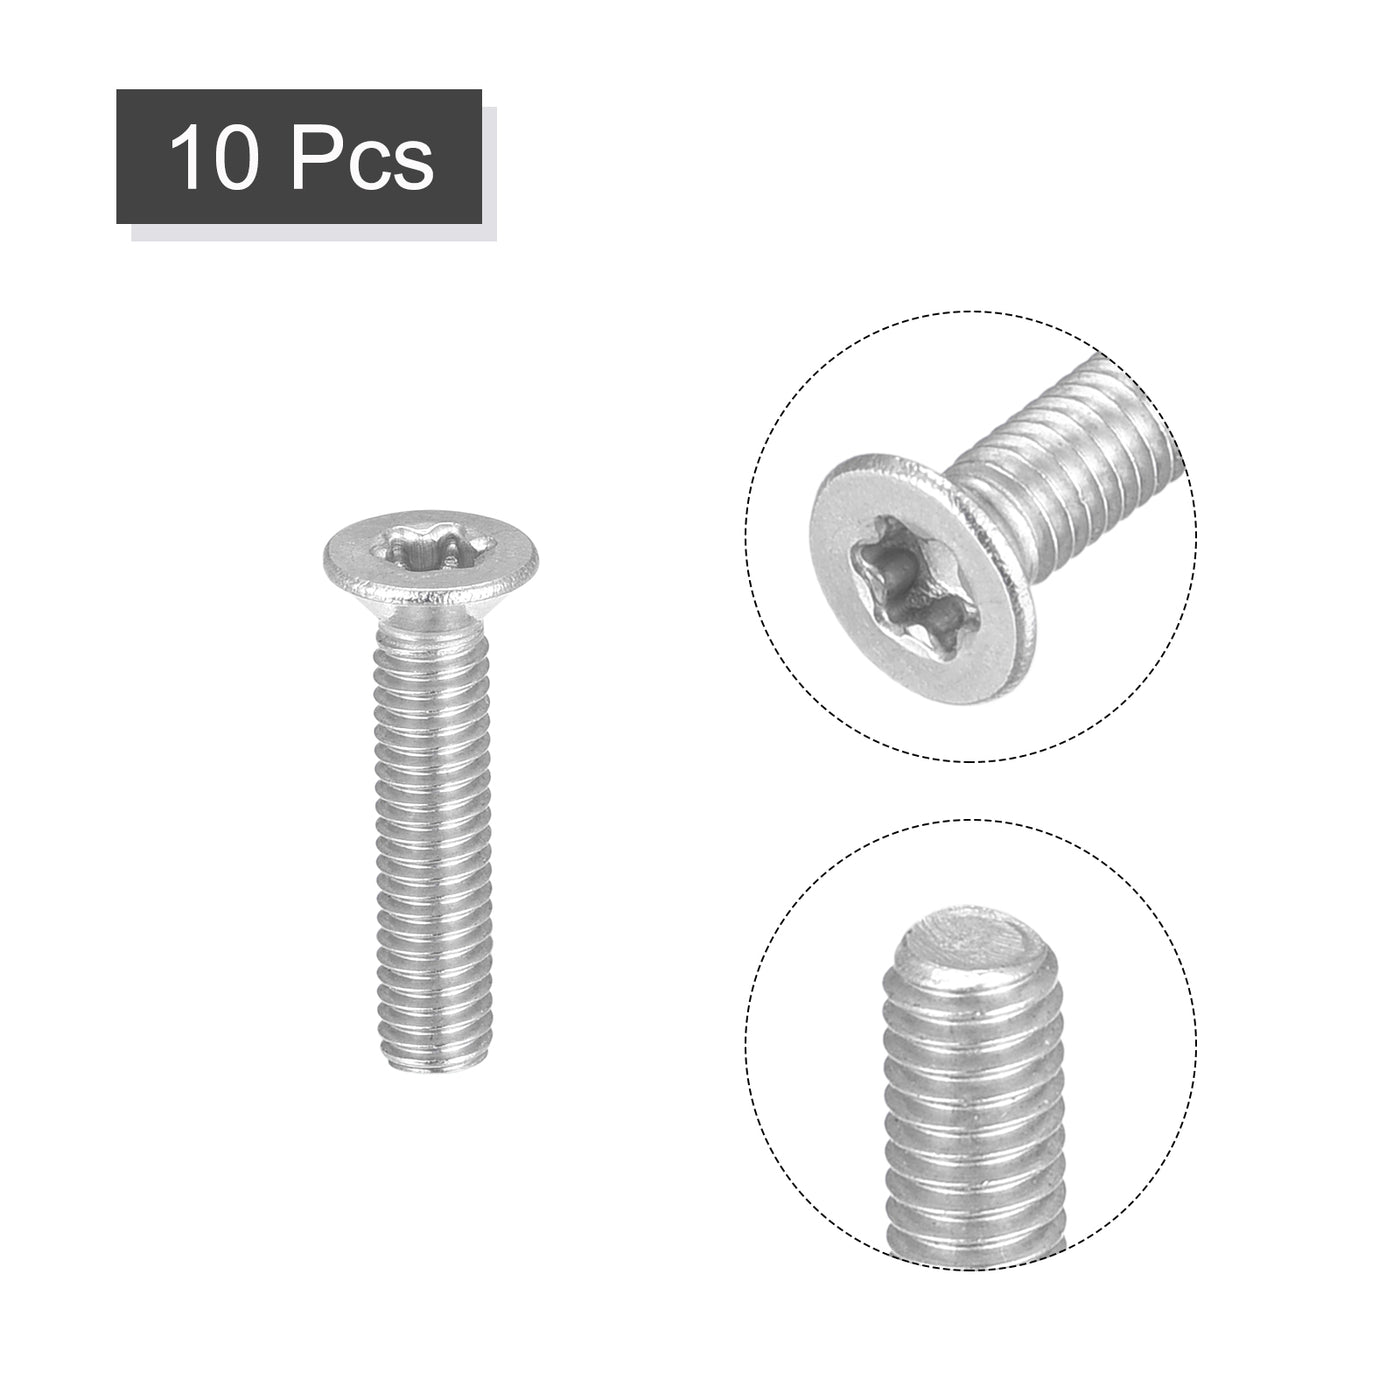 uxcell Uxcell M3x14mm Torx Security Screws, 10pcs 316 Stainless Steel Countersunk Head Screw